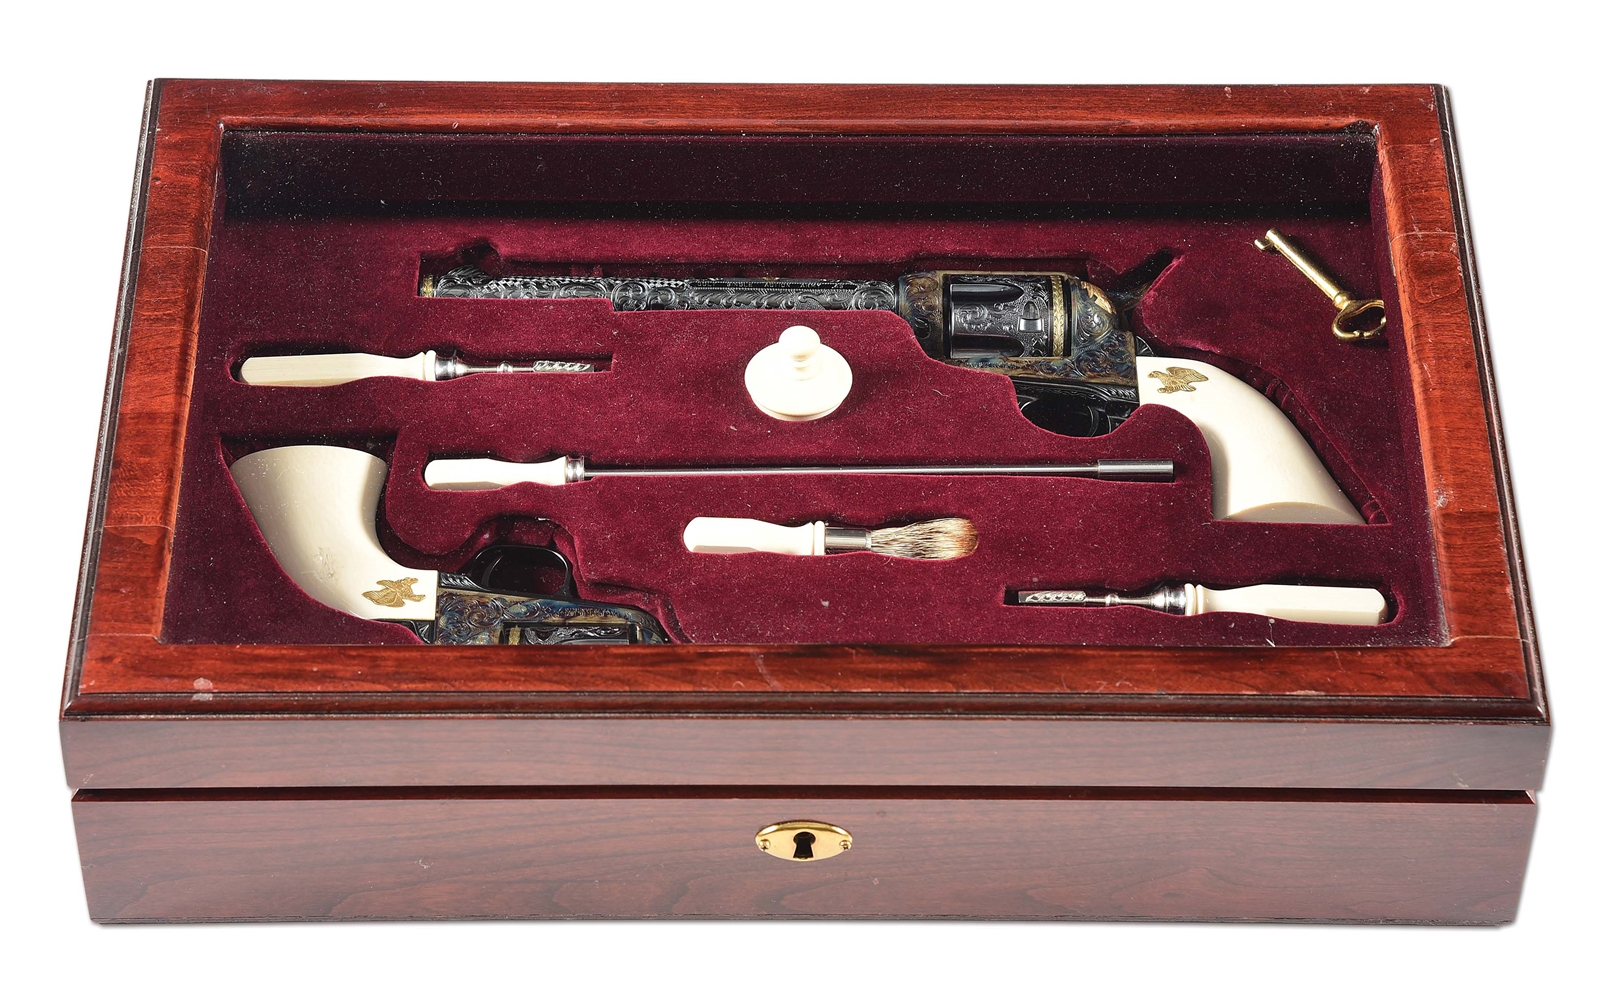 (M) CASED PAIR OF EXHIBITION ENGRAVED COLT SINGLE ACTION REVOLVERS BY JOHN ADAMS SR.